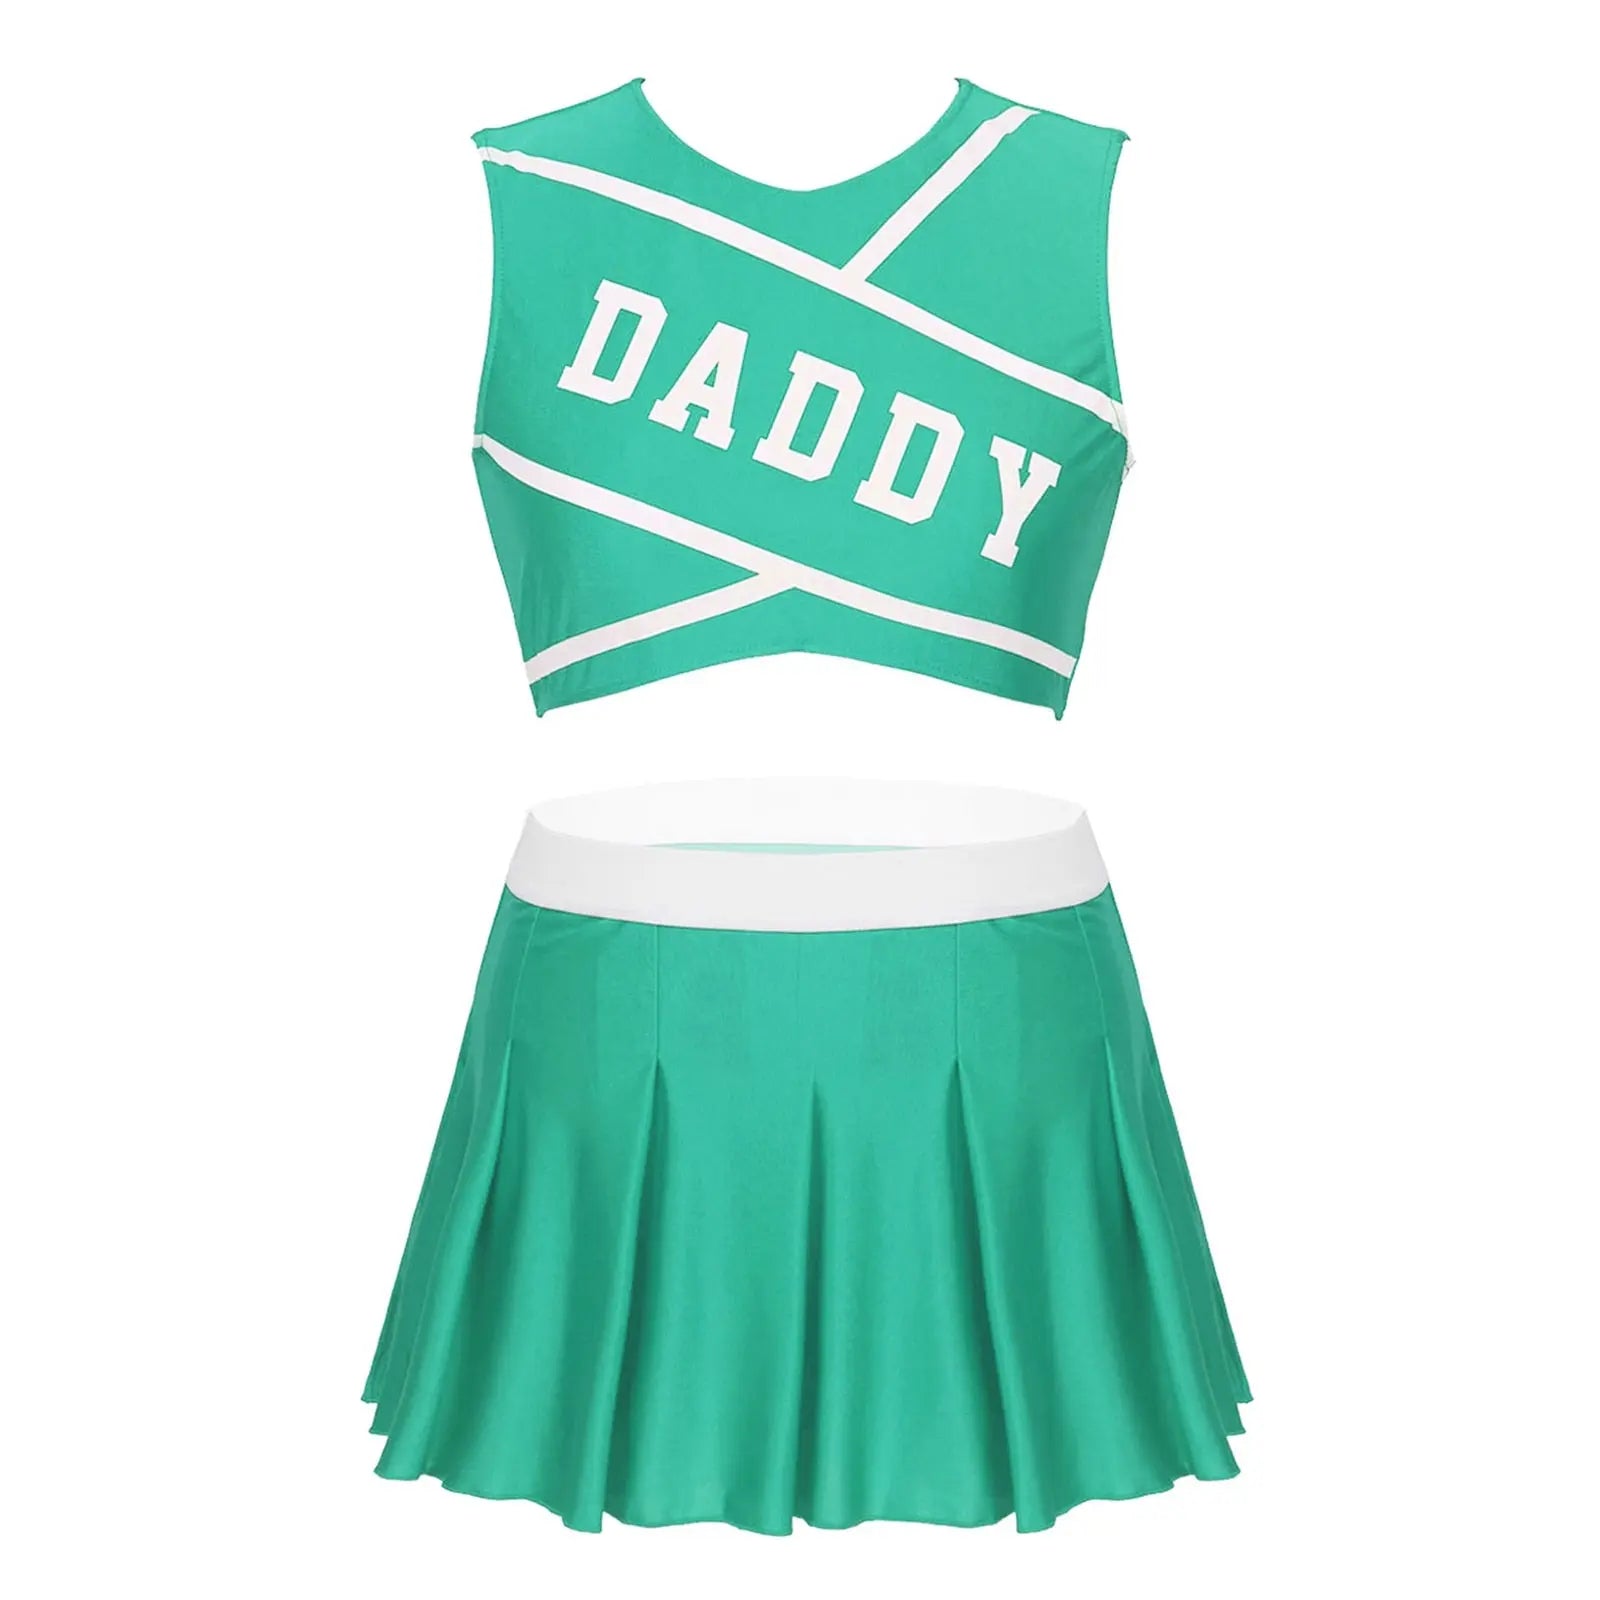 Daddy Cheerleader Crop Top with Mini Pleated Skirt Puppy's Aesthetics